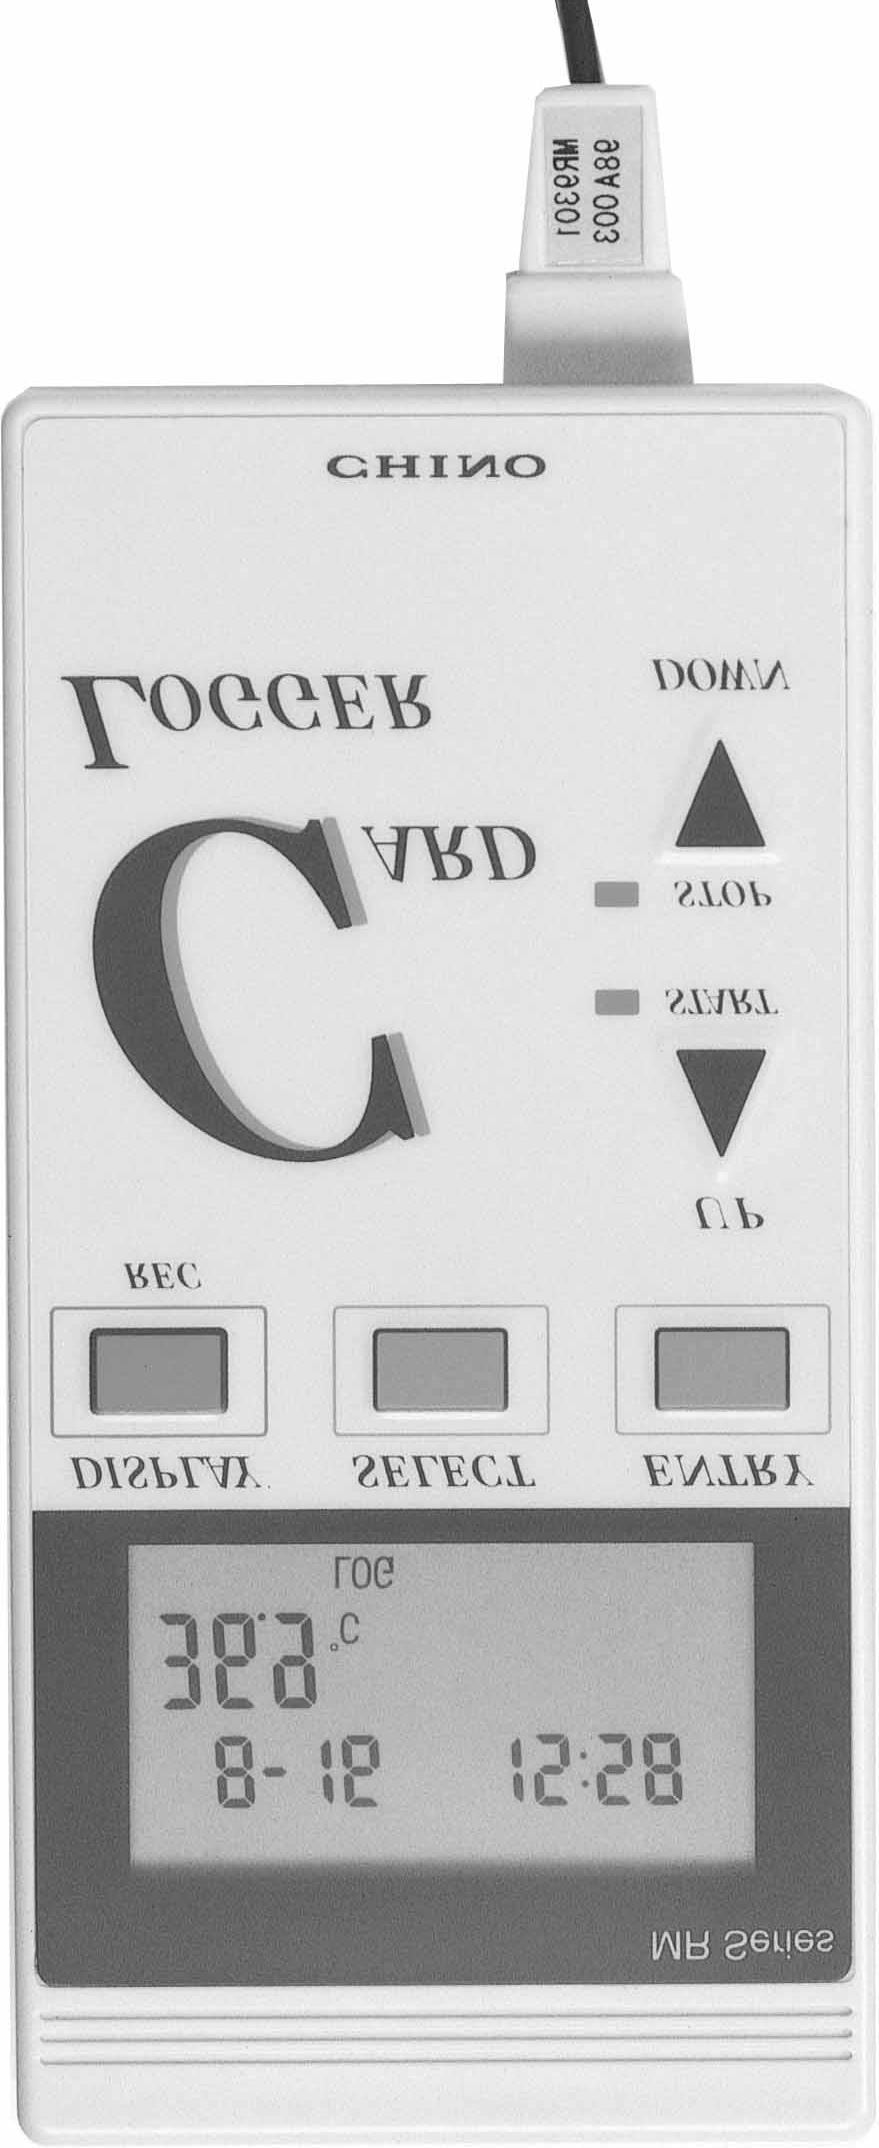 Recalling of data and programming of logging parameters can be executed with this card logger or through a personal computer. This card logger conforms to CE and IP-64.